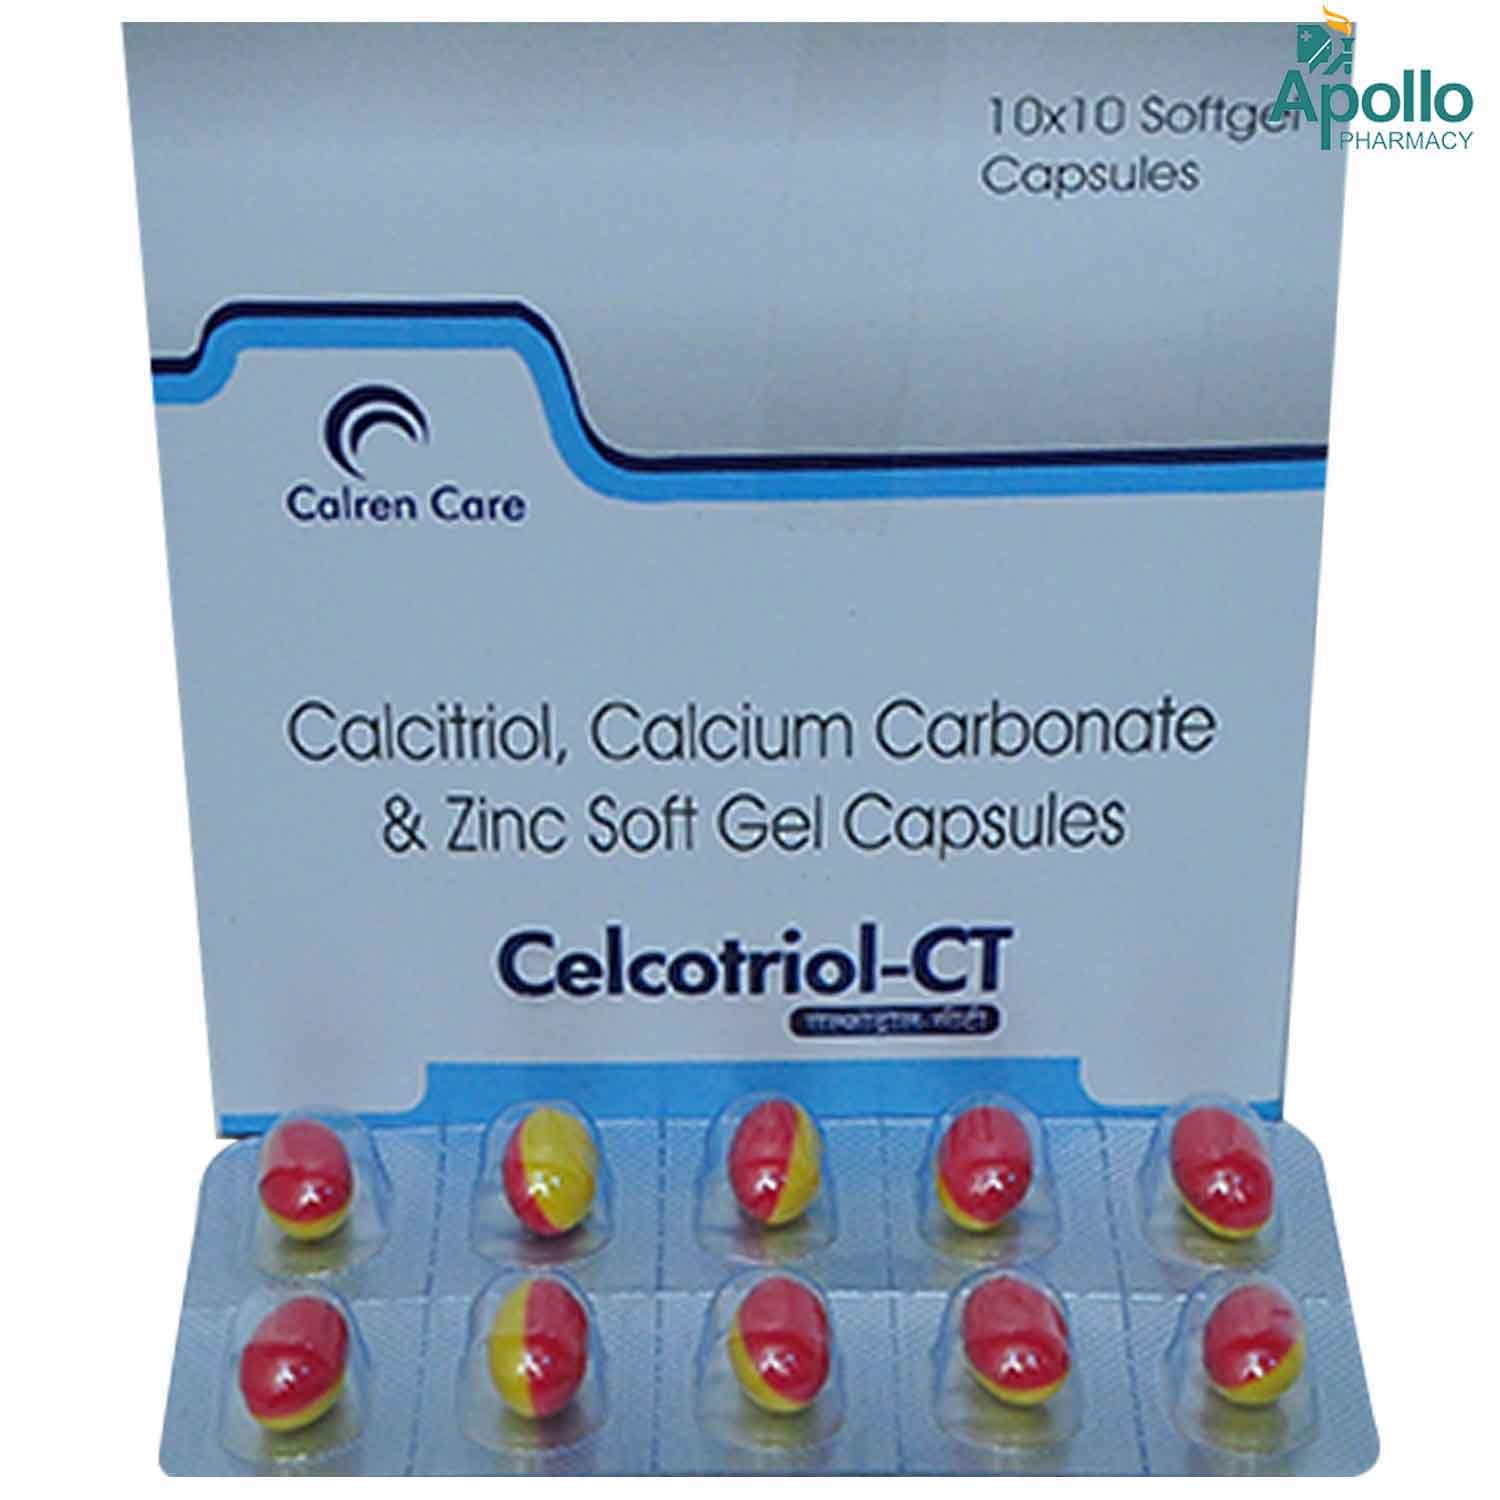 Celcotriol CT Tablet 10's, Pack of 10 TABLETS